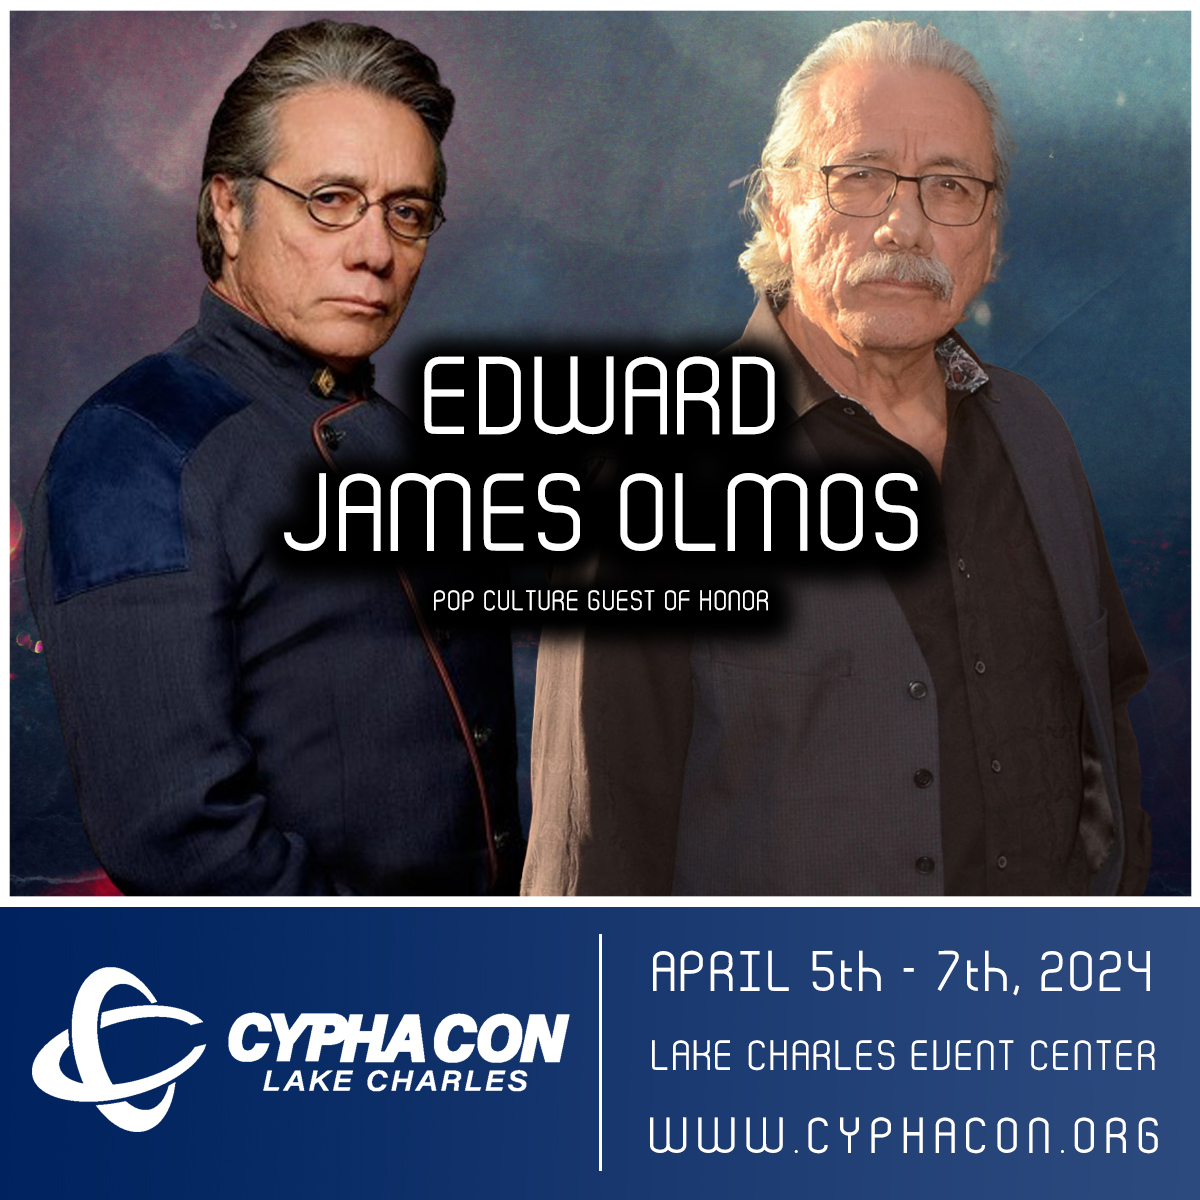 CYPHACON is proud to announce our Pop Culture Guest of Honor, @edwardjolmos Edward will be joining us April 5th - 7th, 2024 at the @LCCivicCenter in Lake Charles Louisiana! For complete information visit our website, tickets on sale now! cyphacon.org/speakers/ejo/